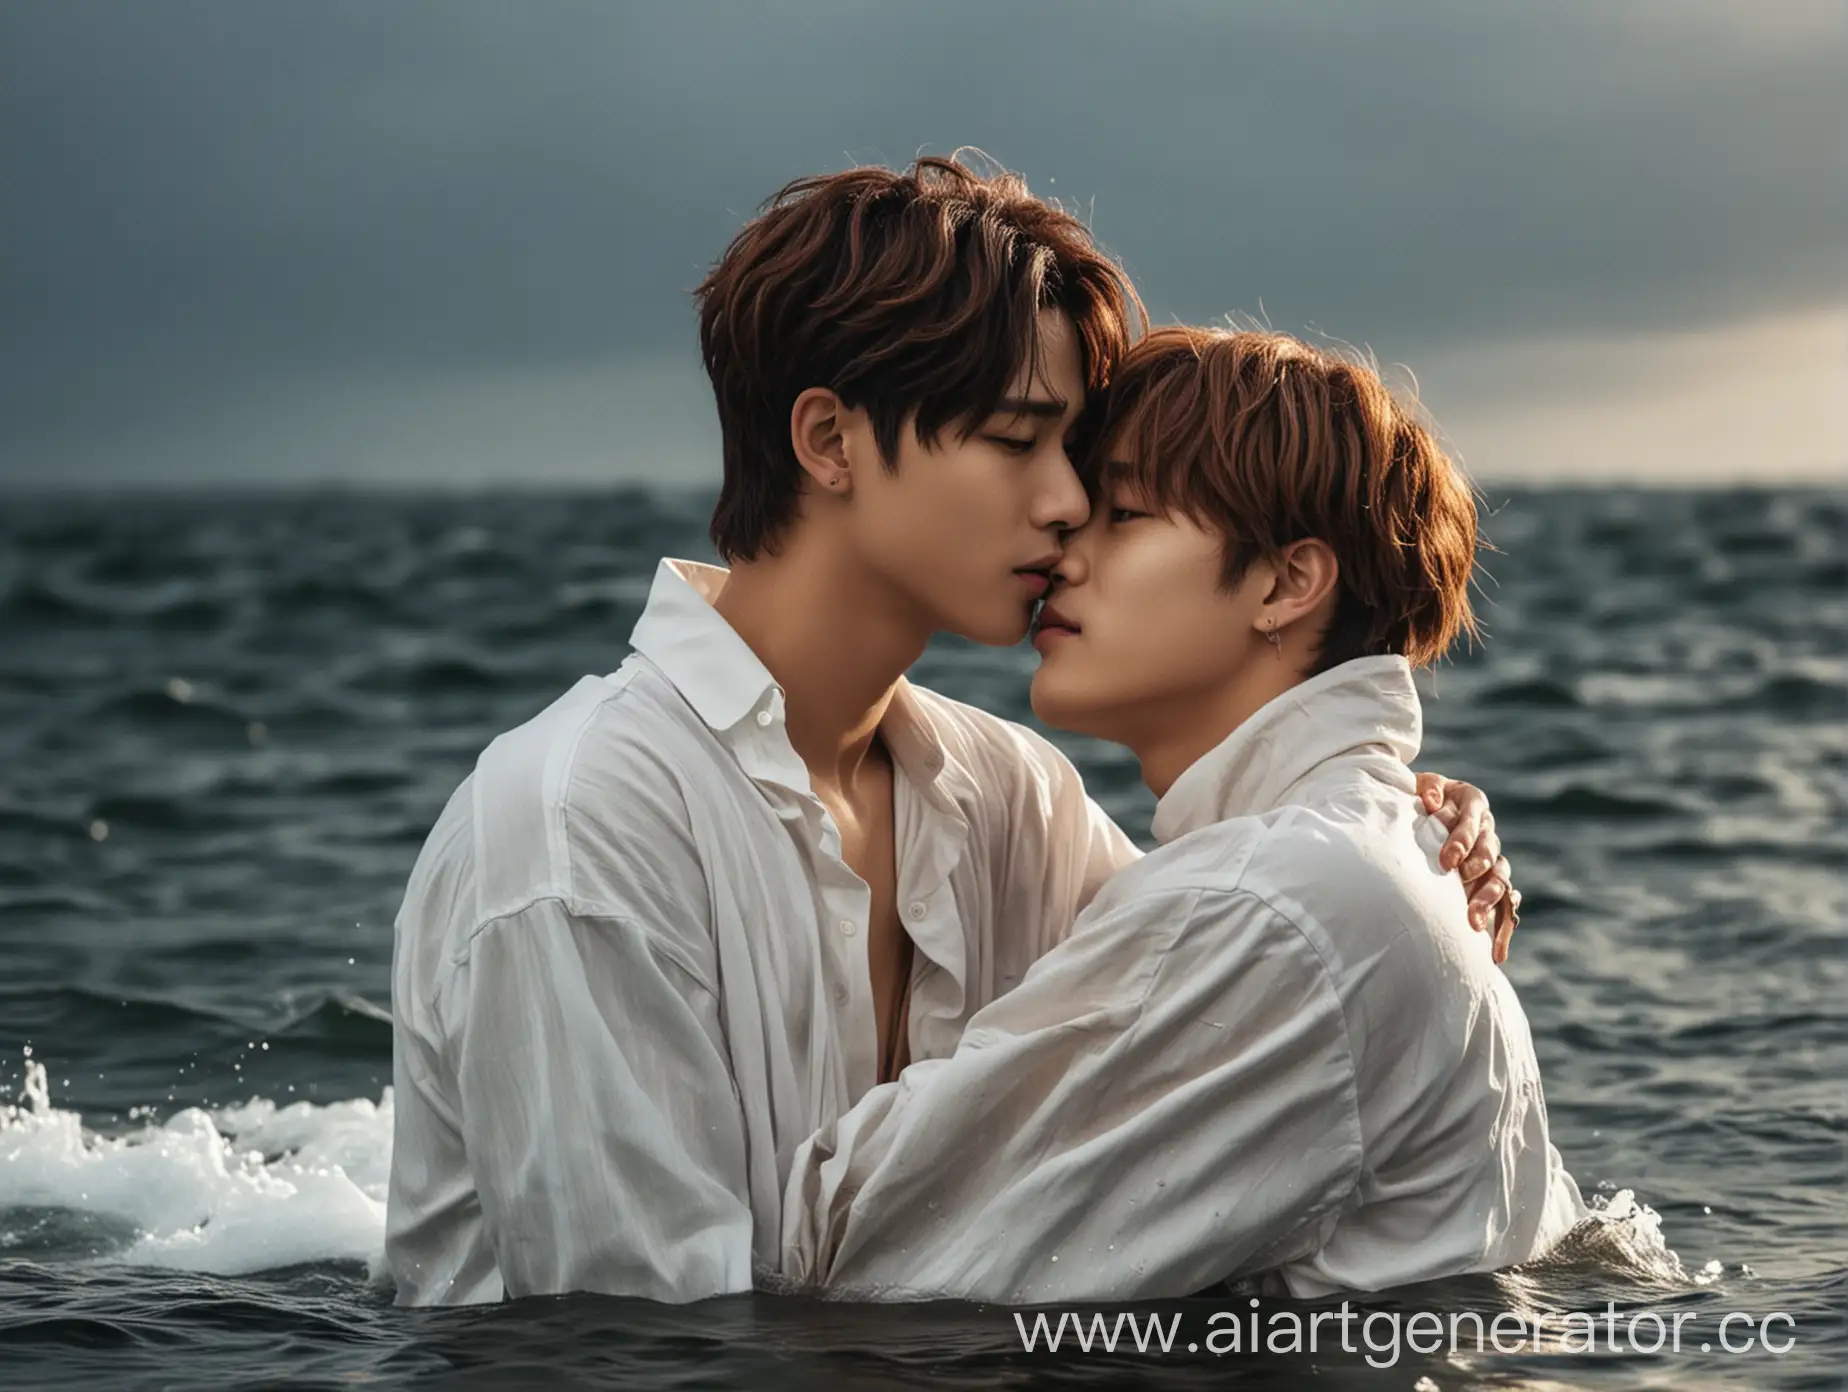 Intimate-Moment-Minho-and-HAN-Embrace-in-Ocean-Love-Affair